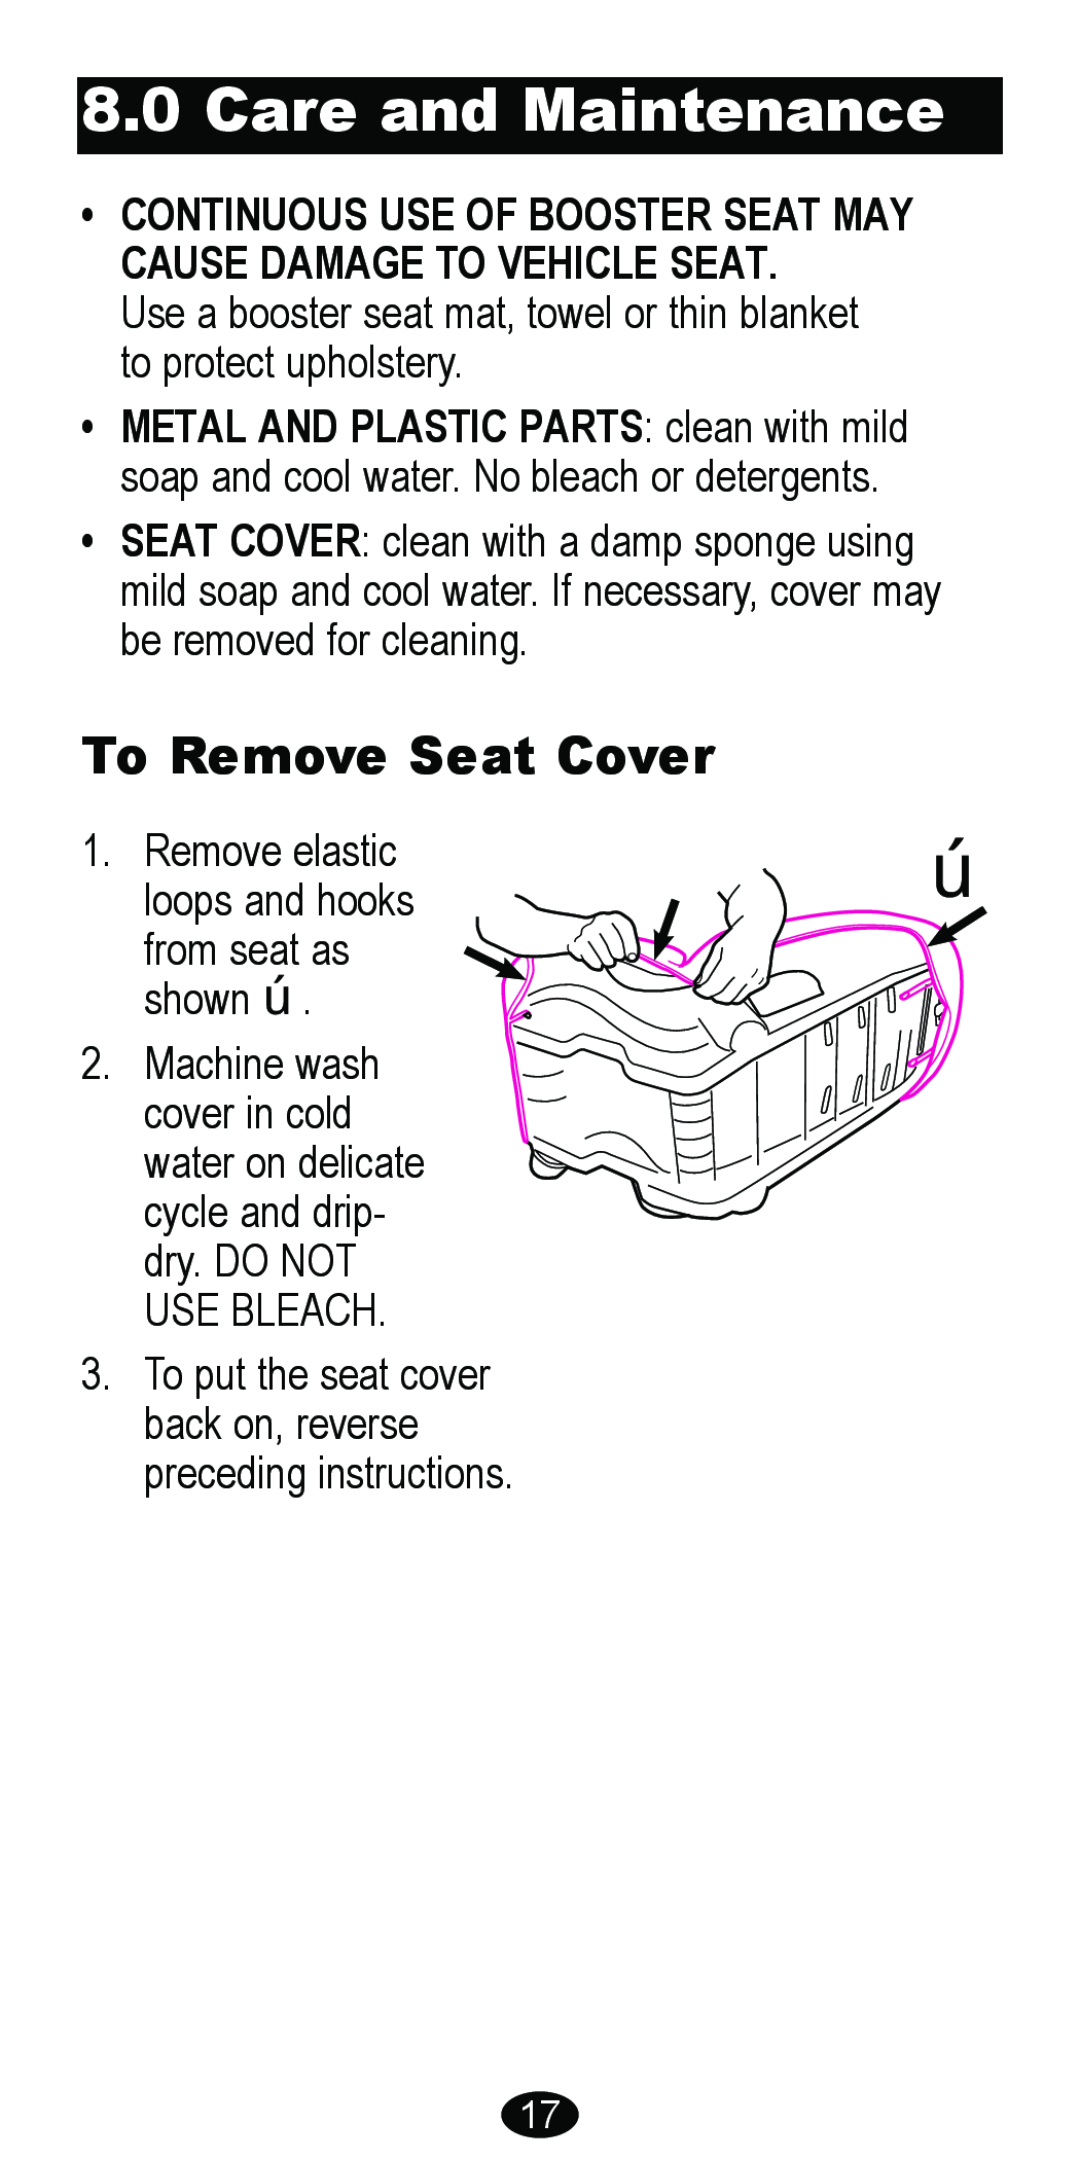 Graco 8481 owner manual Care and Maintenance, To Remove Seat Cover 